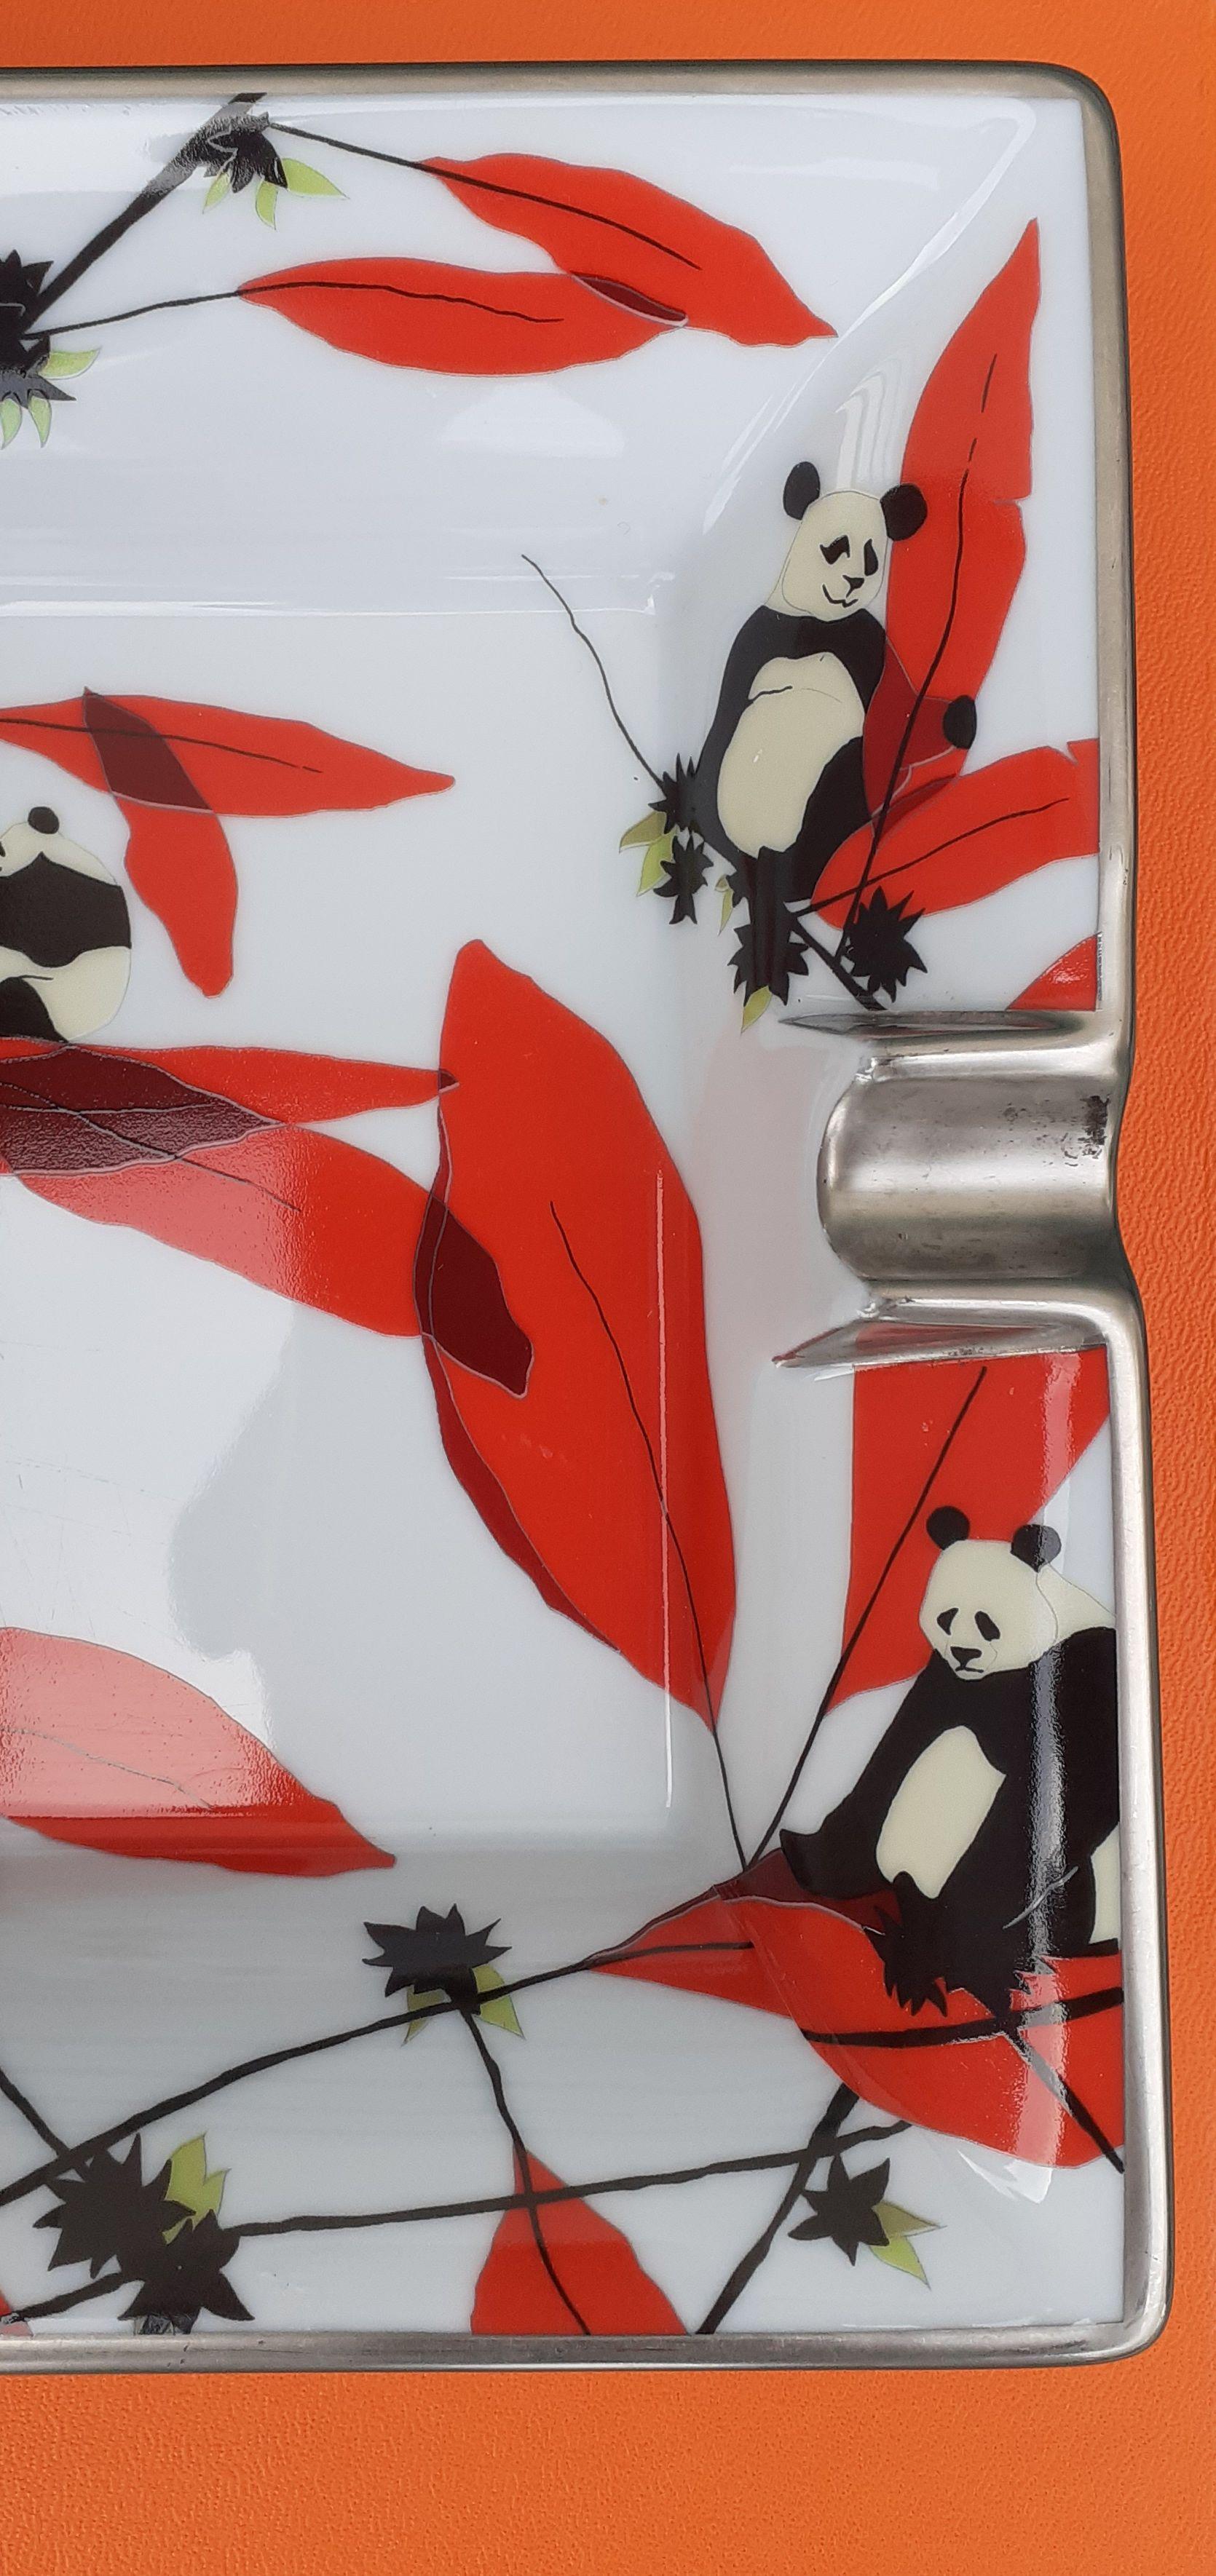 Gorgeous Authentic Hermès Ashtray

Pattern: 8 Pandas and Bamboos

Super cute and rare

Made in France

Made of Porcelain and silver-tone edges

Colorways: White Background, Ivory and Black Pandas, Red and Green Bamboos

Suede Leather at bottom, with